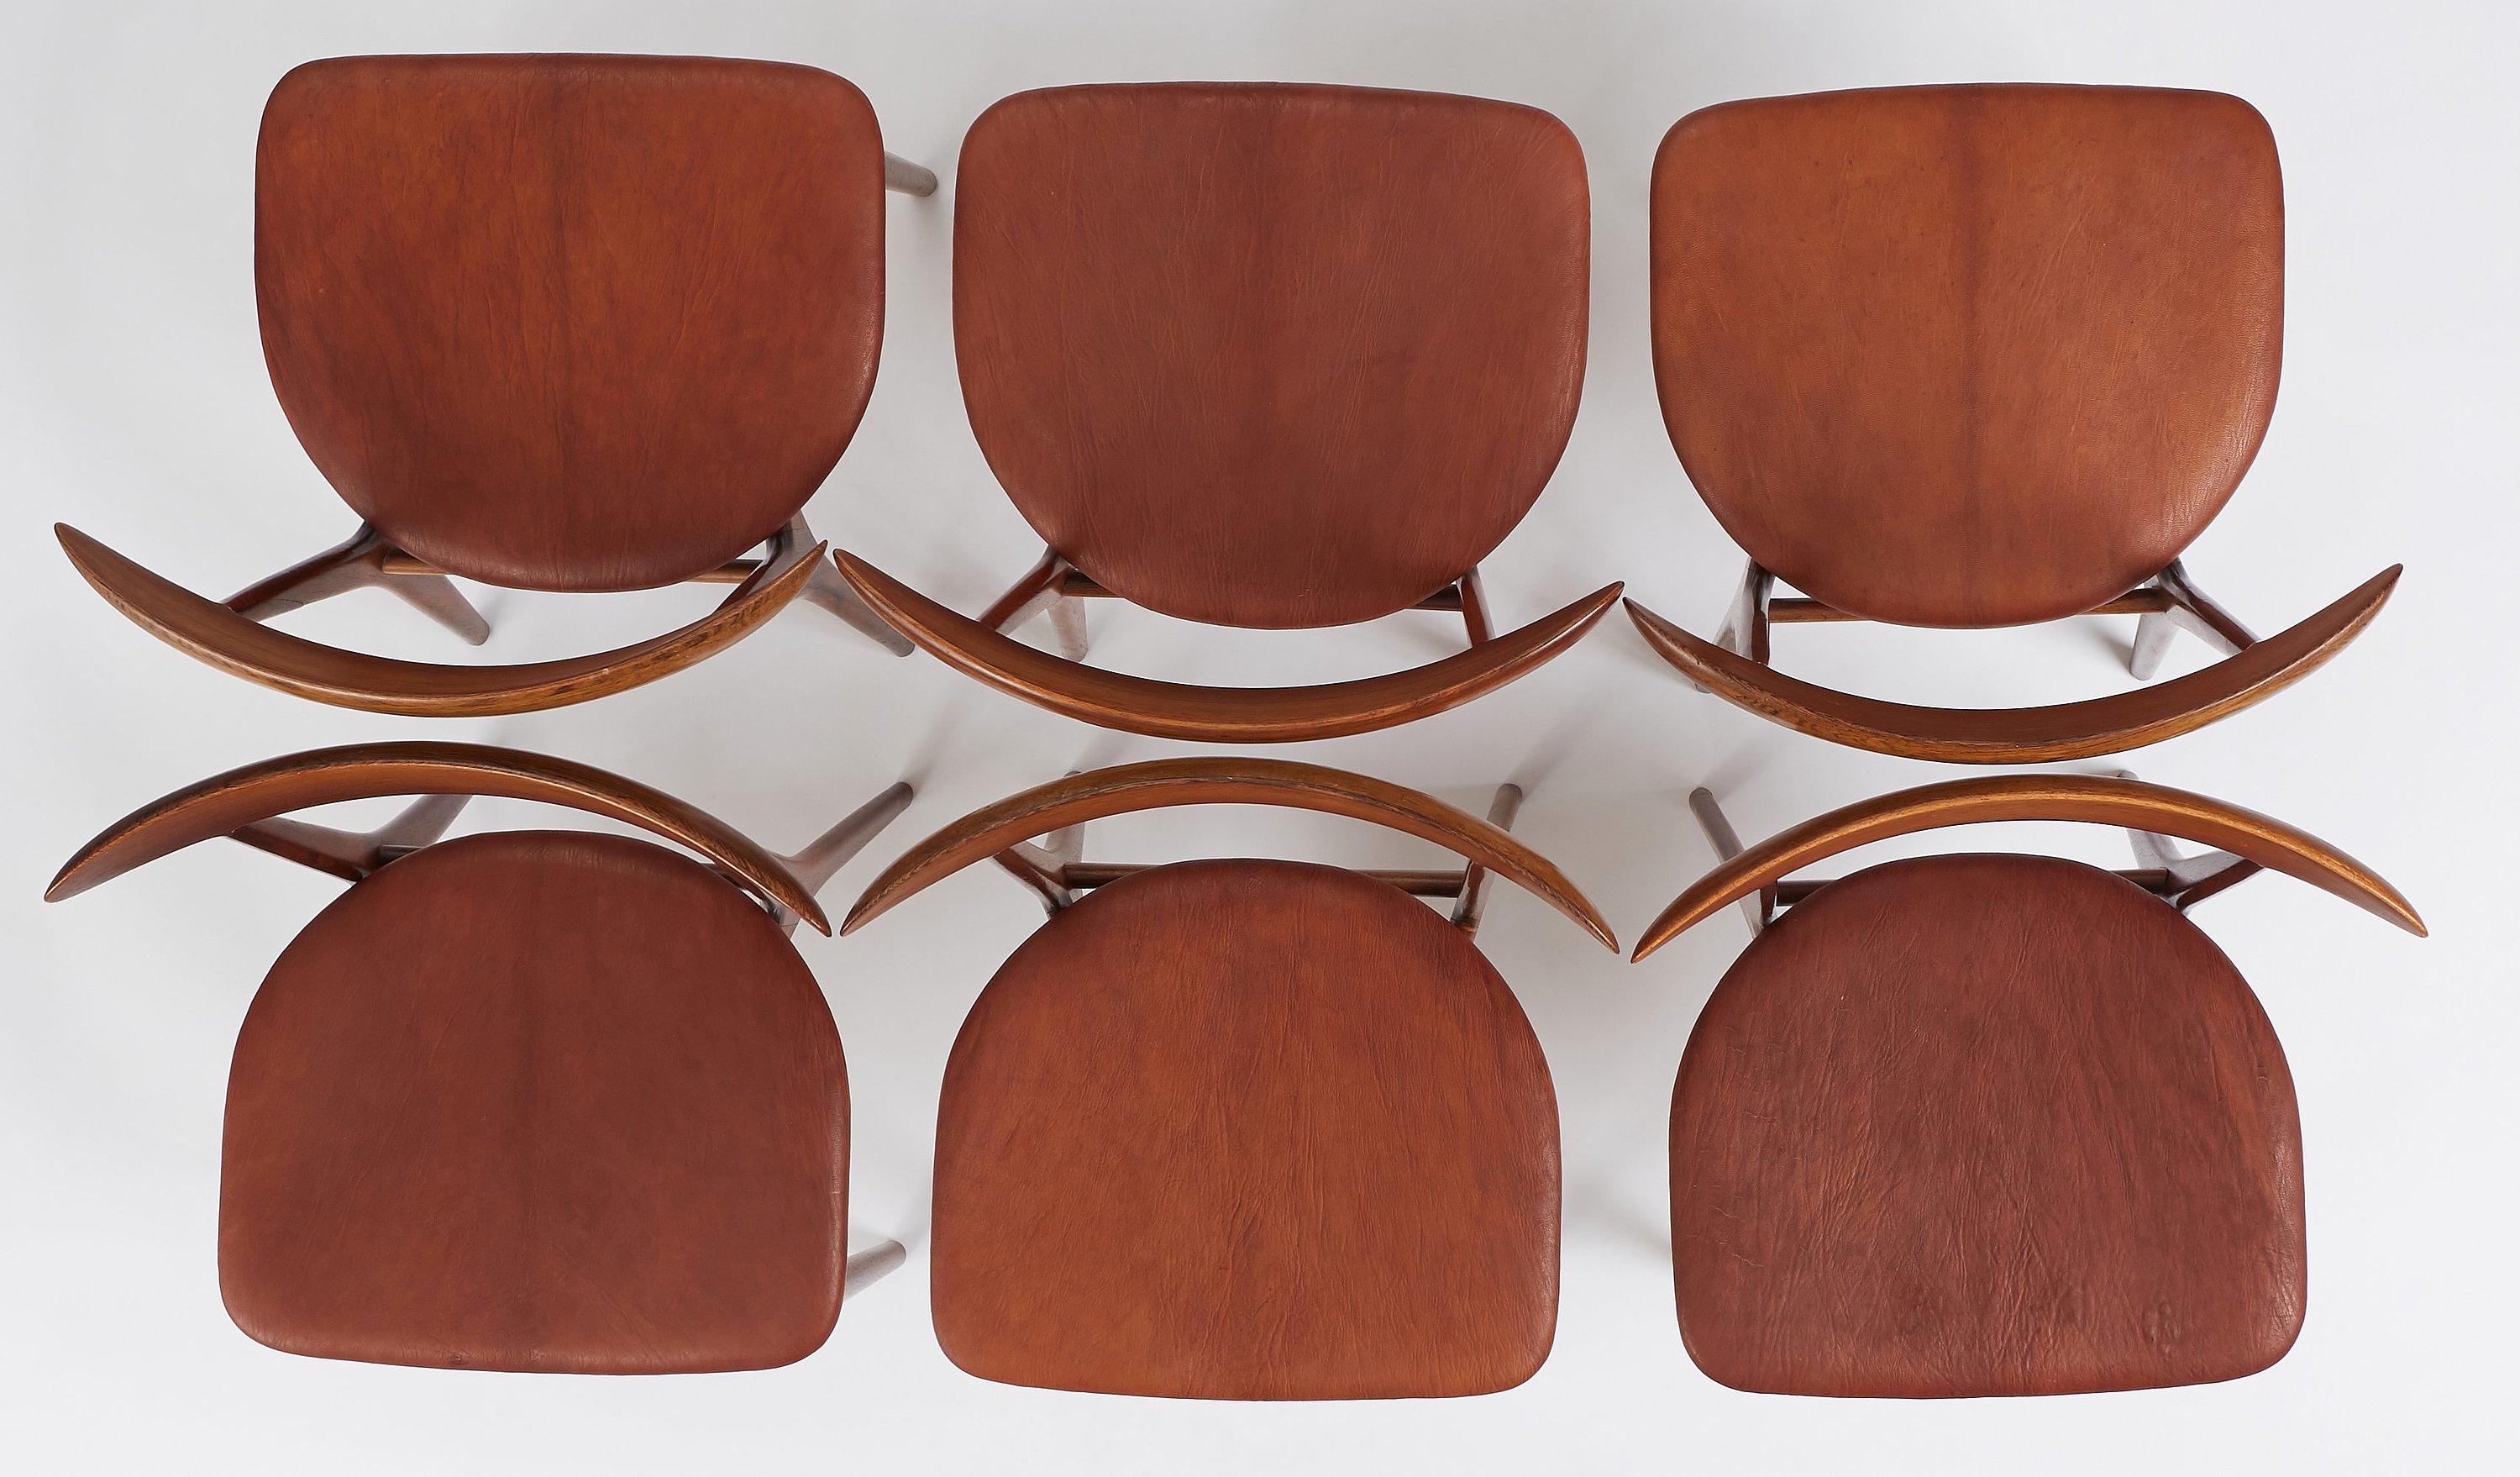 Goatskin Set of 10 ROSEWOOD and patinated niger leather dining chairs, by Kurt Østervig For Sale